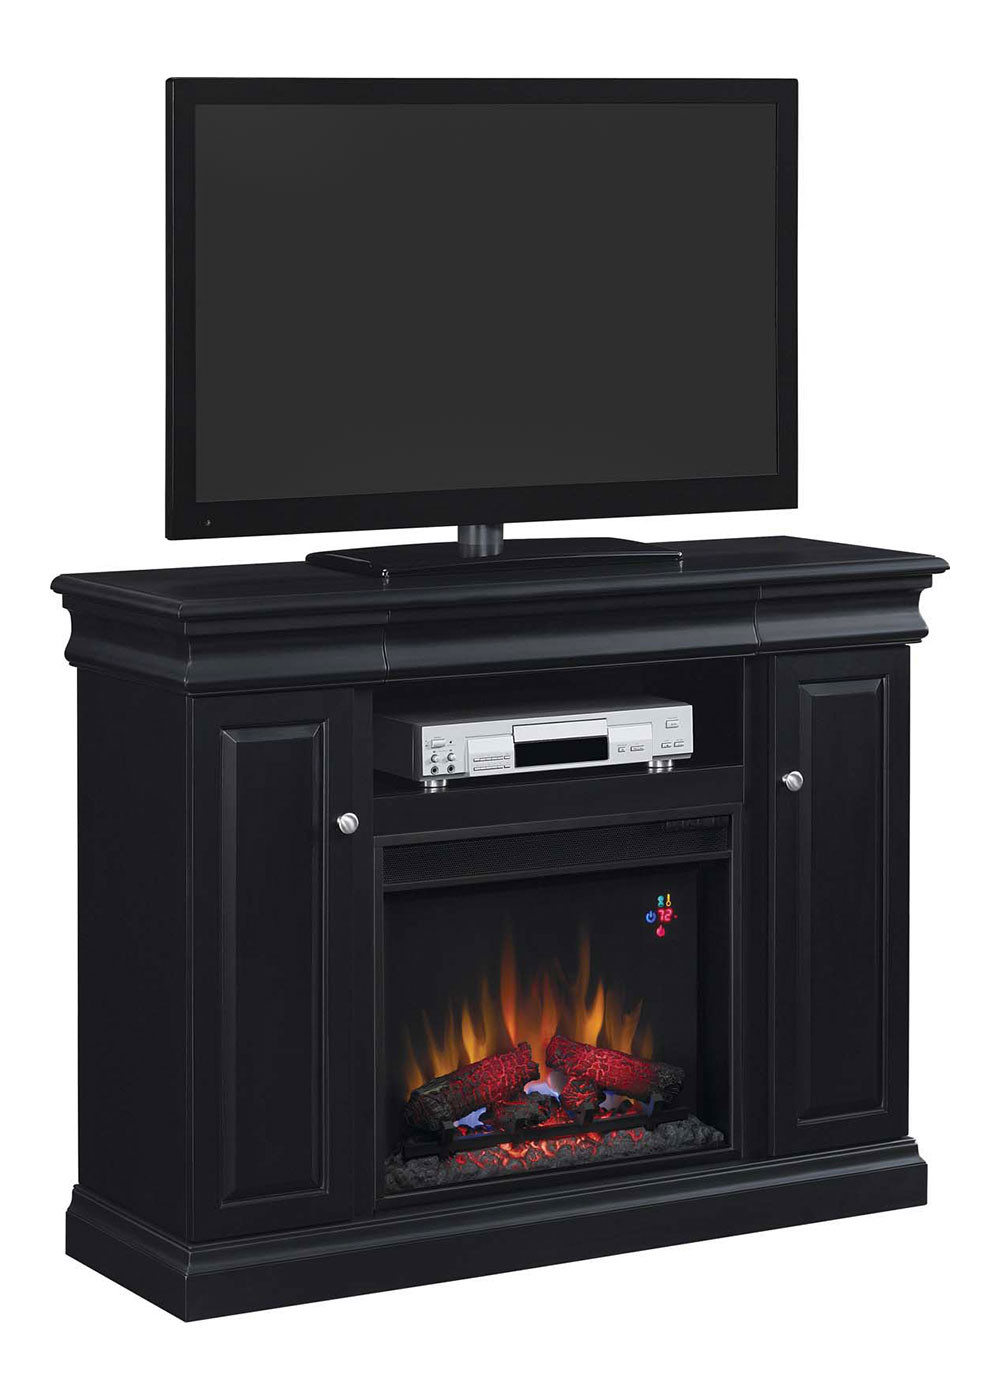 Electric Fireplace Console
 Louie Electric Fireplace Media Console in Black 23MM9643